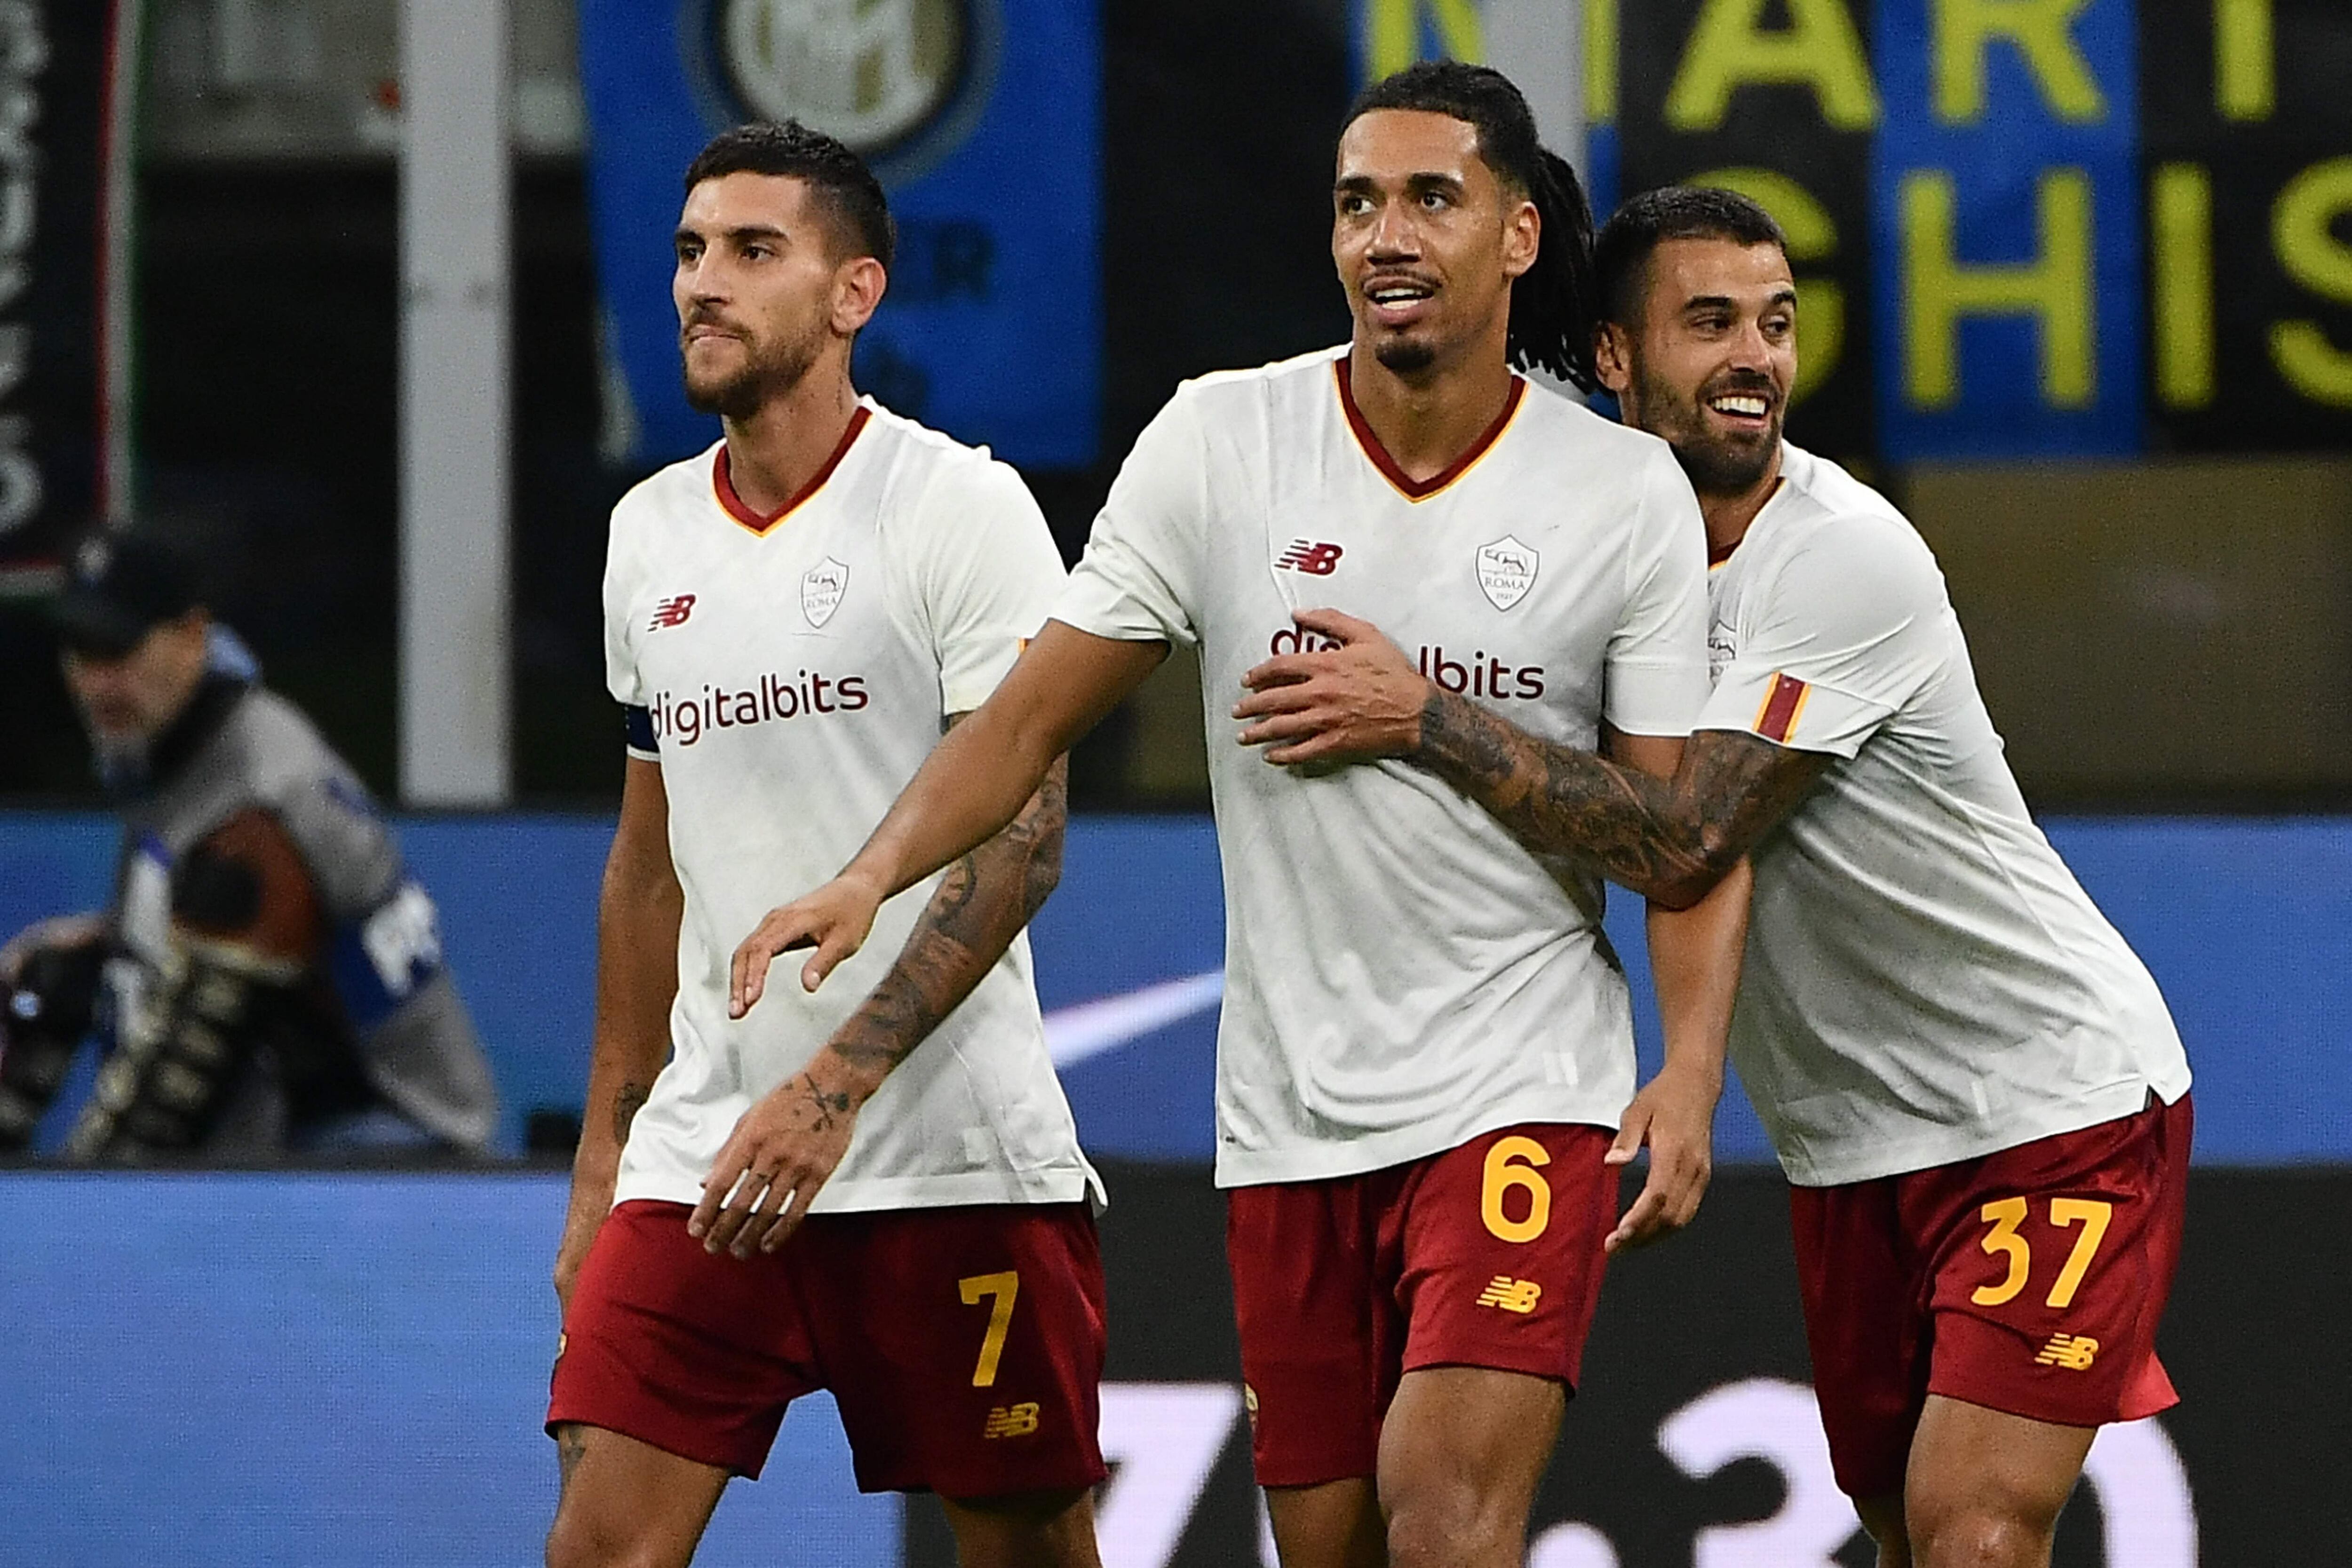 AS Roma's British defender Chris Smalling (C) celebrates with AS Roma's Italian midfielder Lorenzo Pellegrini (L) and AS Roma's Italian defender Leonardo Spinazzola after scoring during the Italian Serie A football match between Inter and AS Roma on October 1, 2022 at the Giuseppe-Meazza (San Siro) stadium in Milan. (Photo by Isabella BONOTTO / AFP)